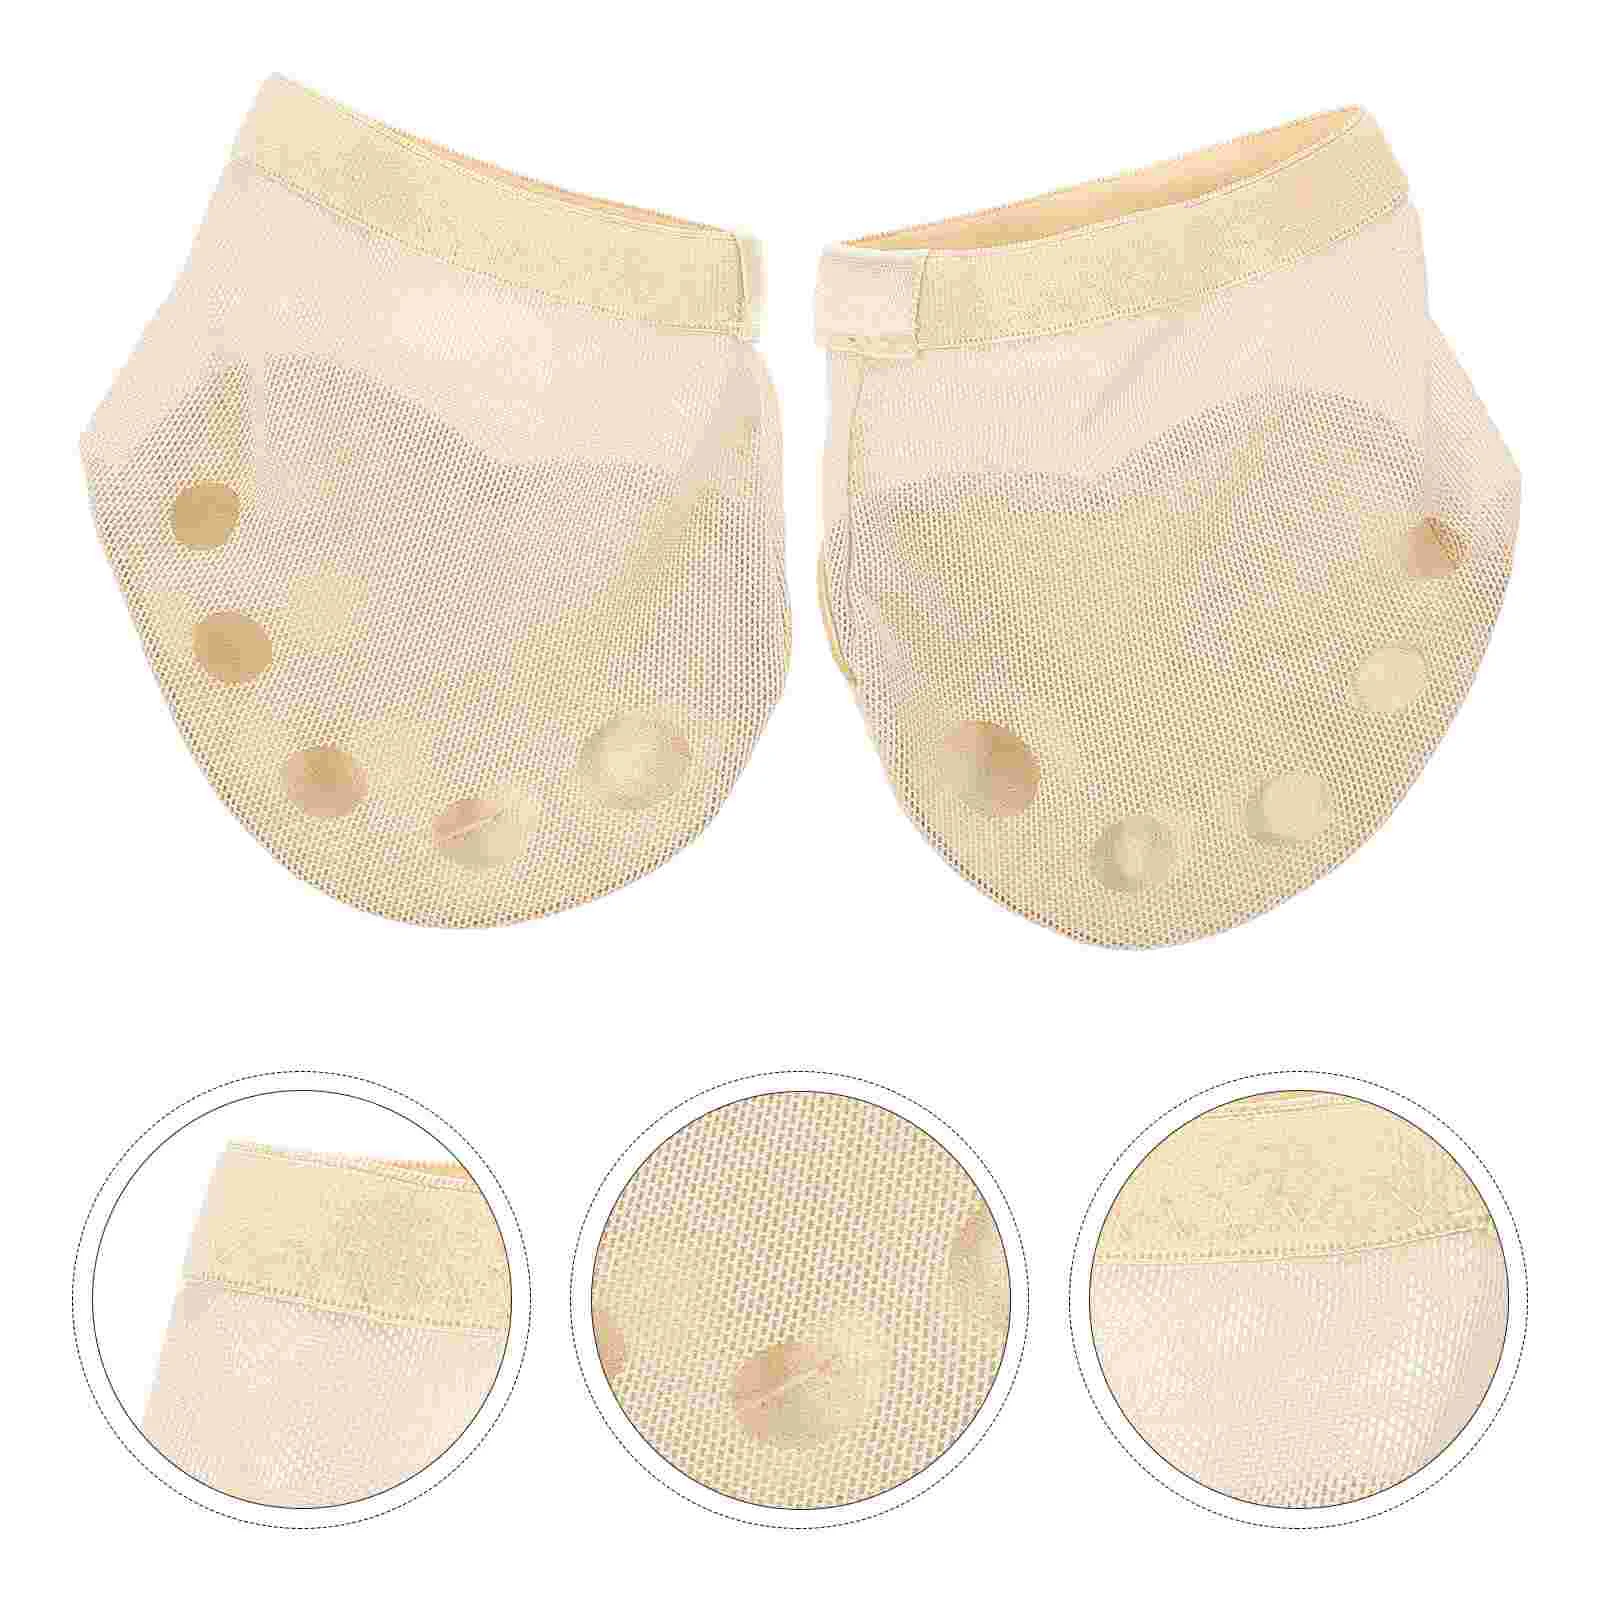 1 Pair Five Holes Half Socks Forefoot Cushion Protective Foot Paw Foot Care Supplies for Ballet Size S new kokuyo south korea loose leaf line page paper notebook diary a5 student 8 holes notepad hand book stationery supplies gifts